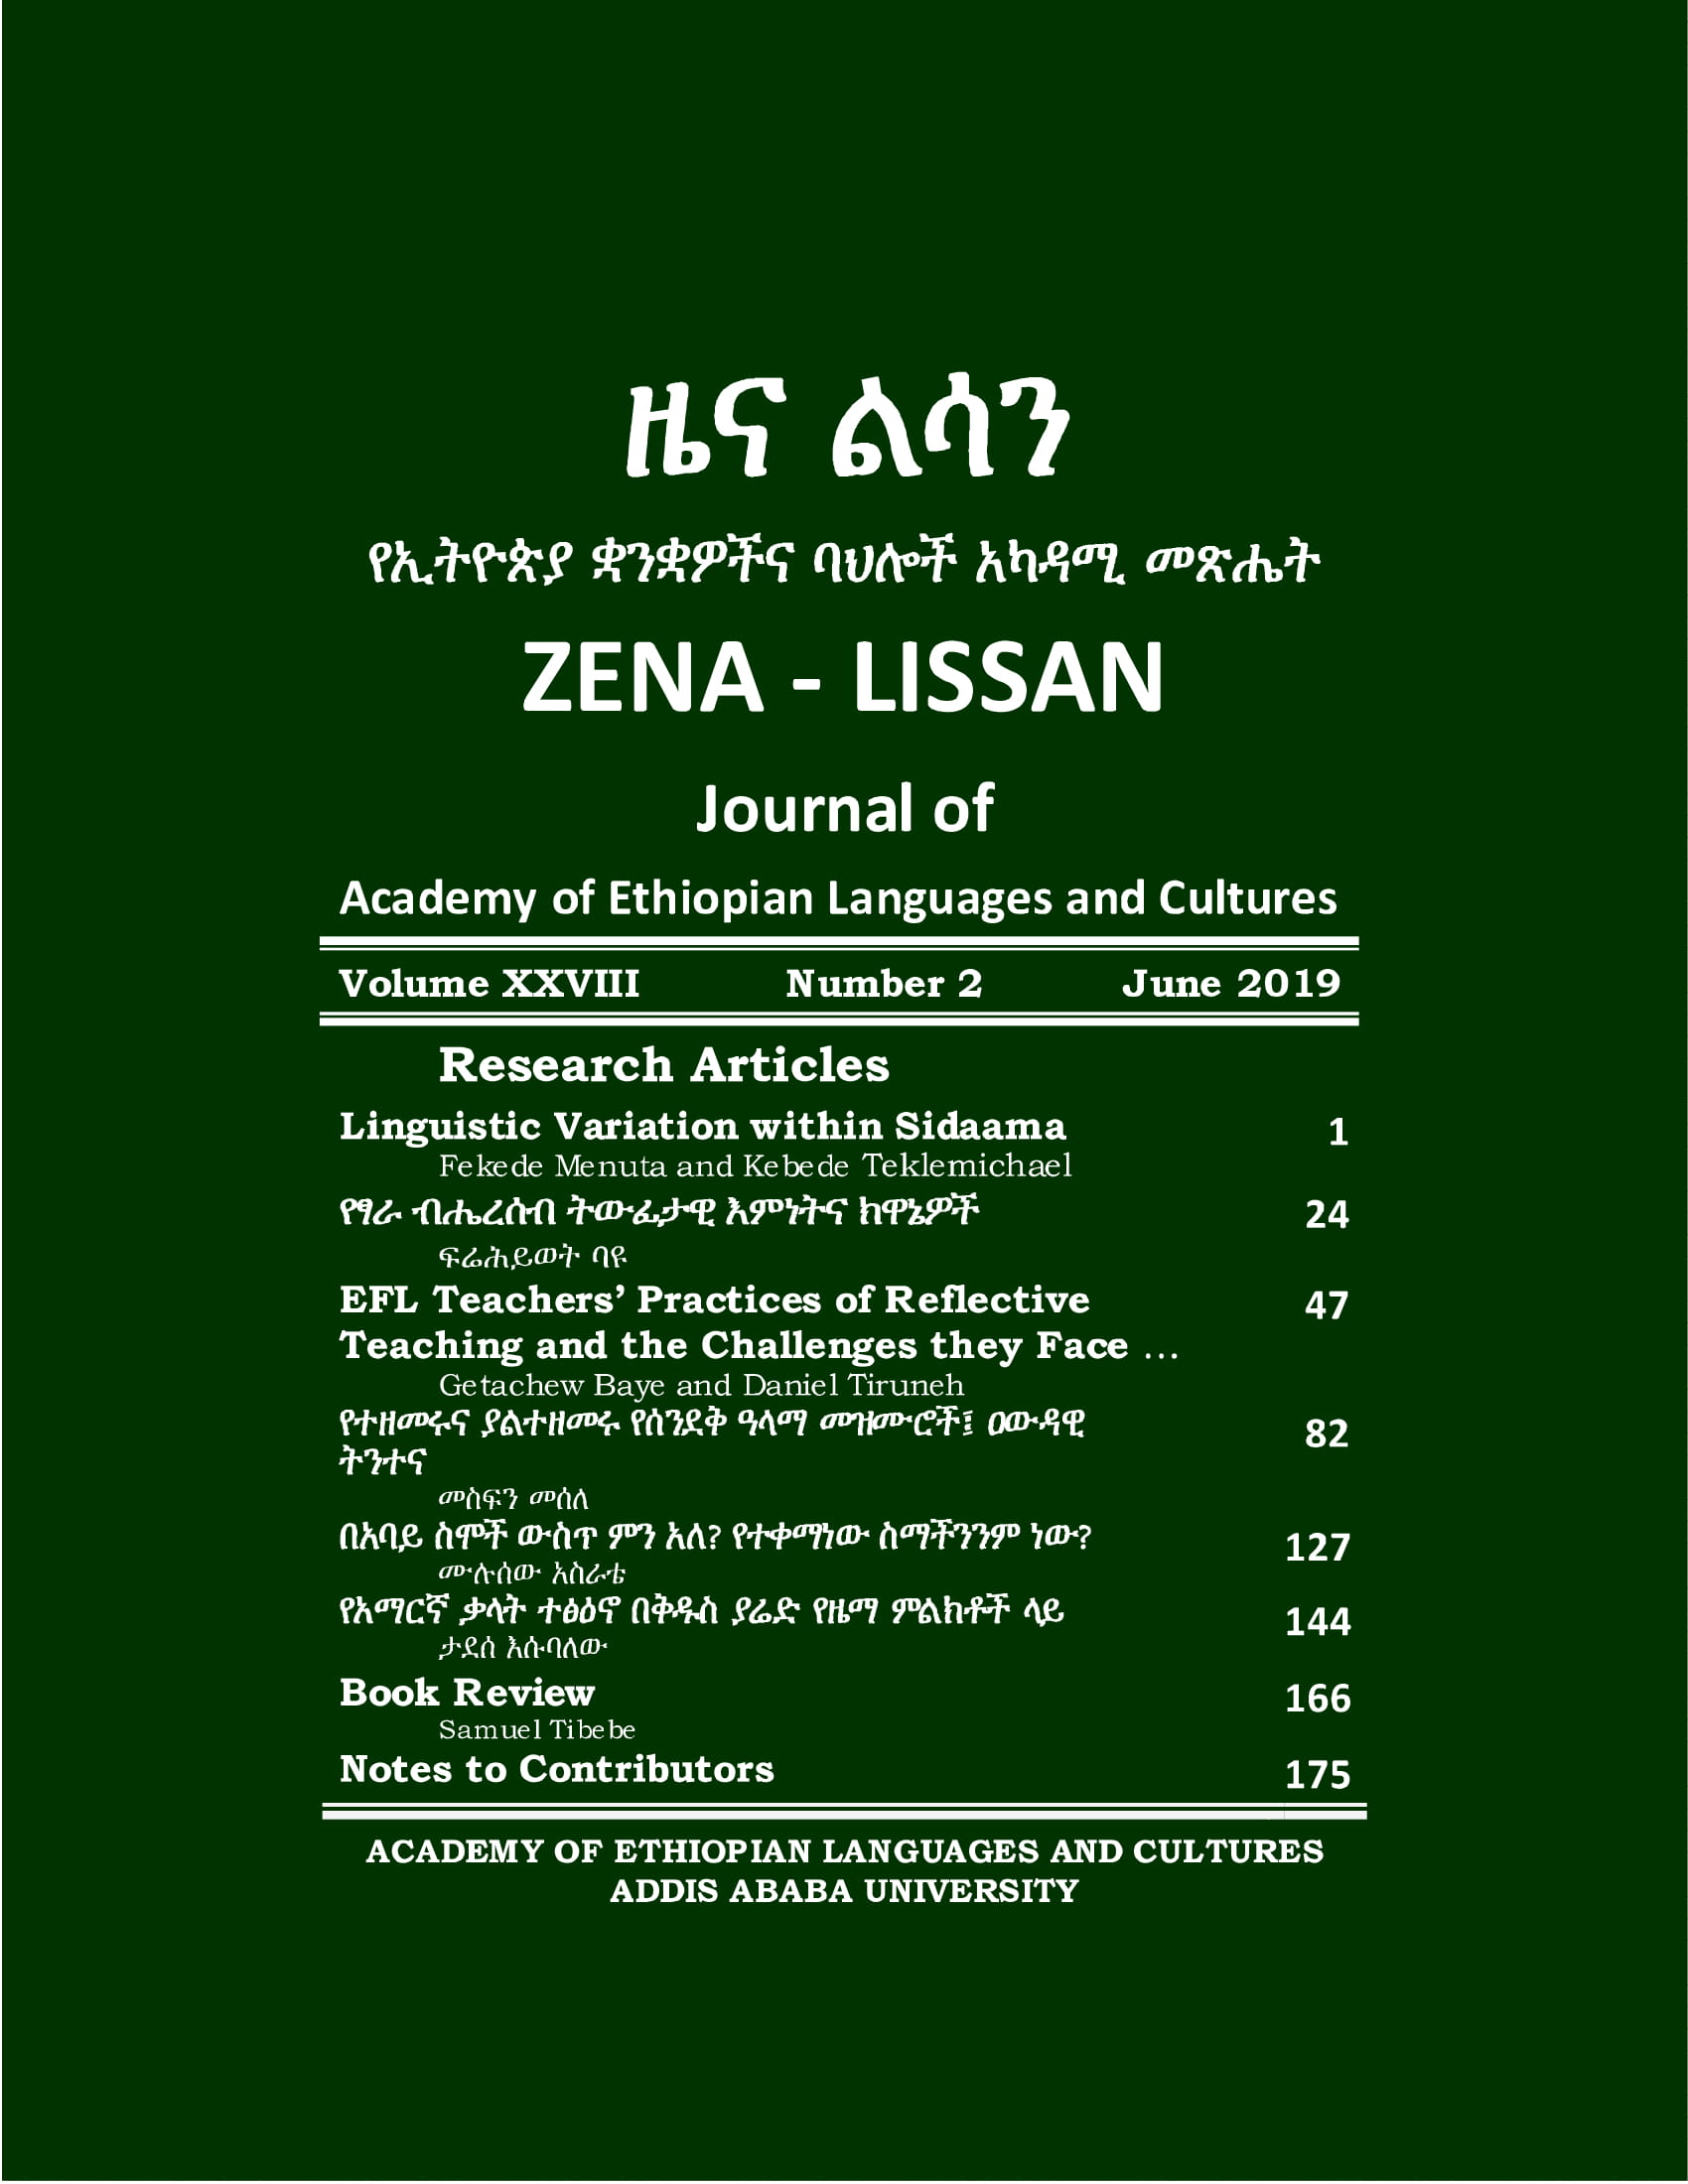 					View Vol. 28 No. 2 (2019): ZENA-LISSAN Journal of Ethiopian Languages and Cultures
				